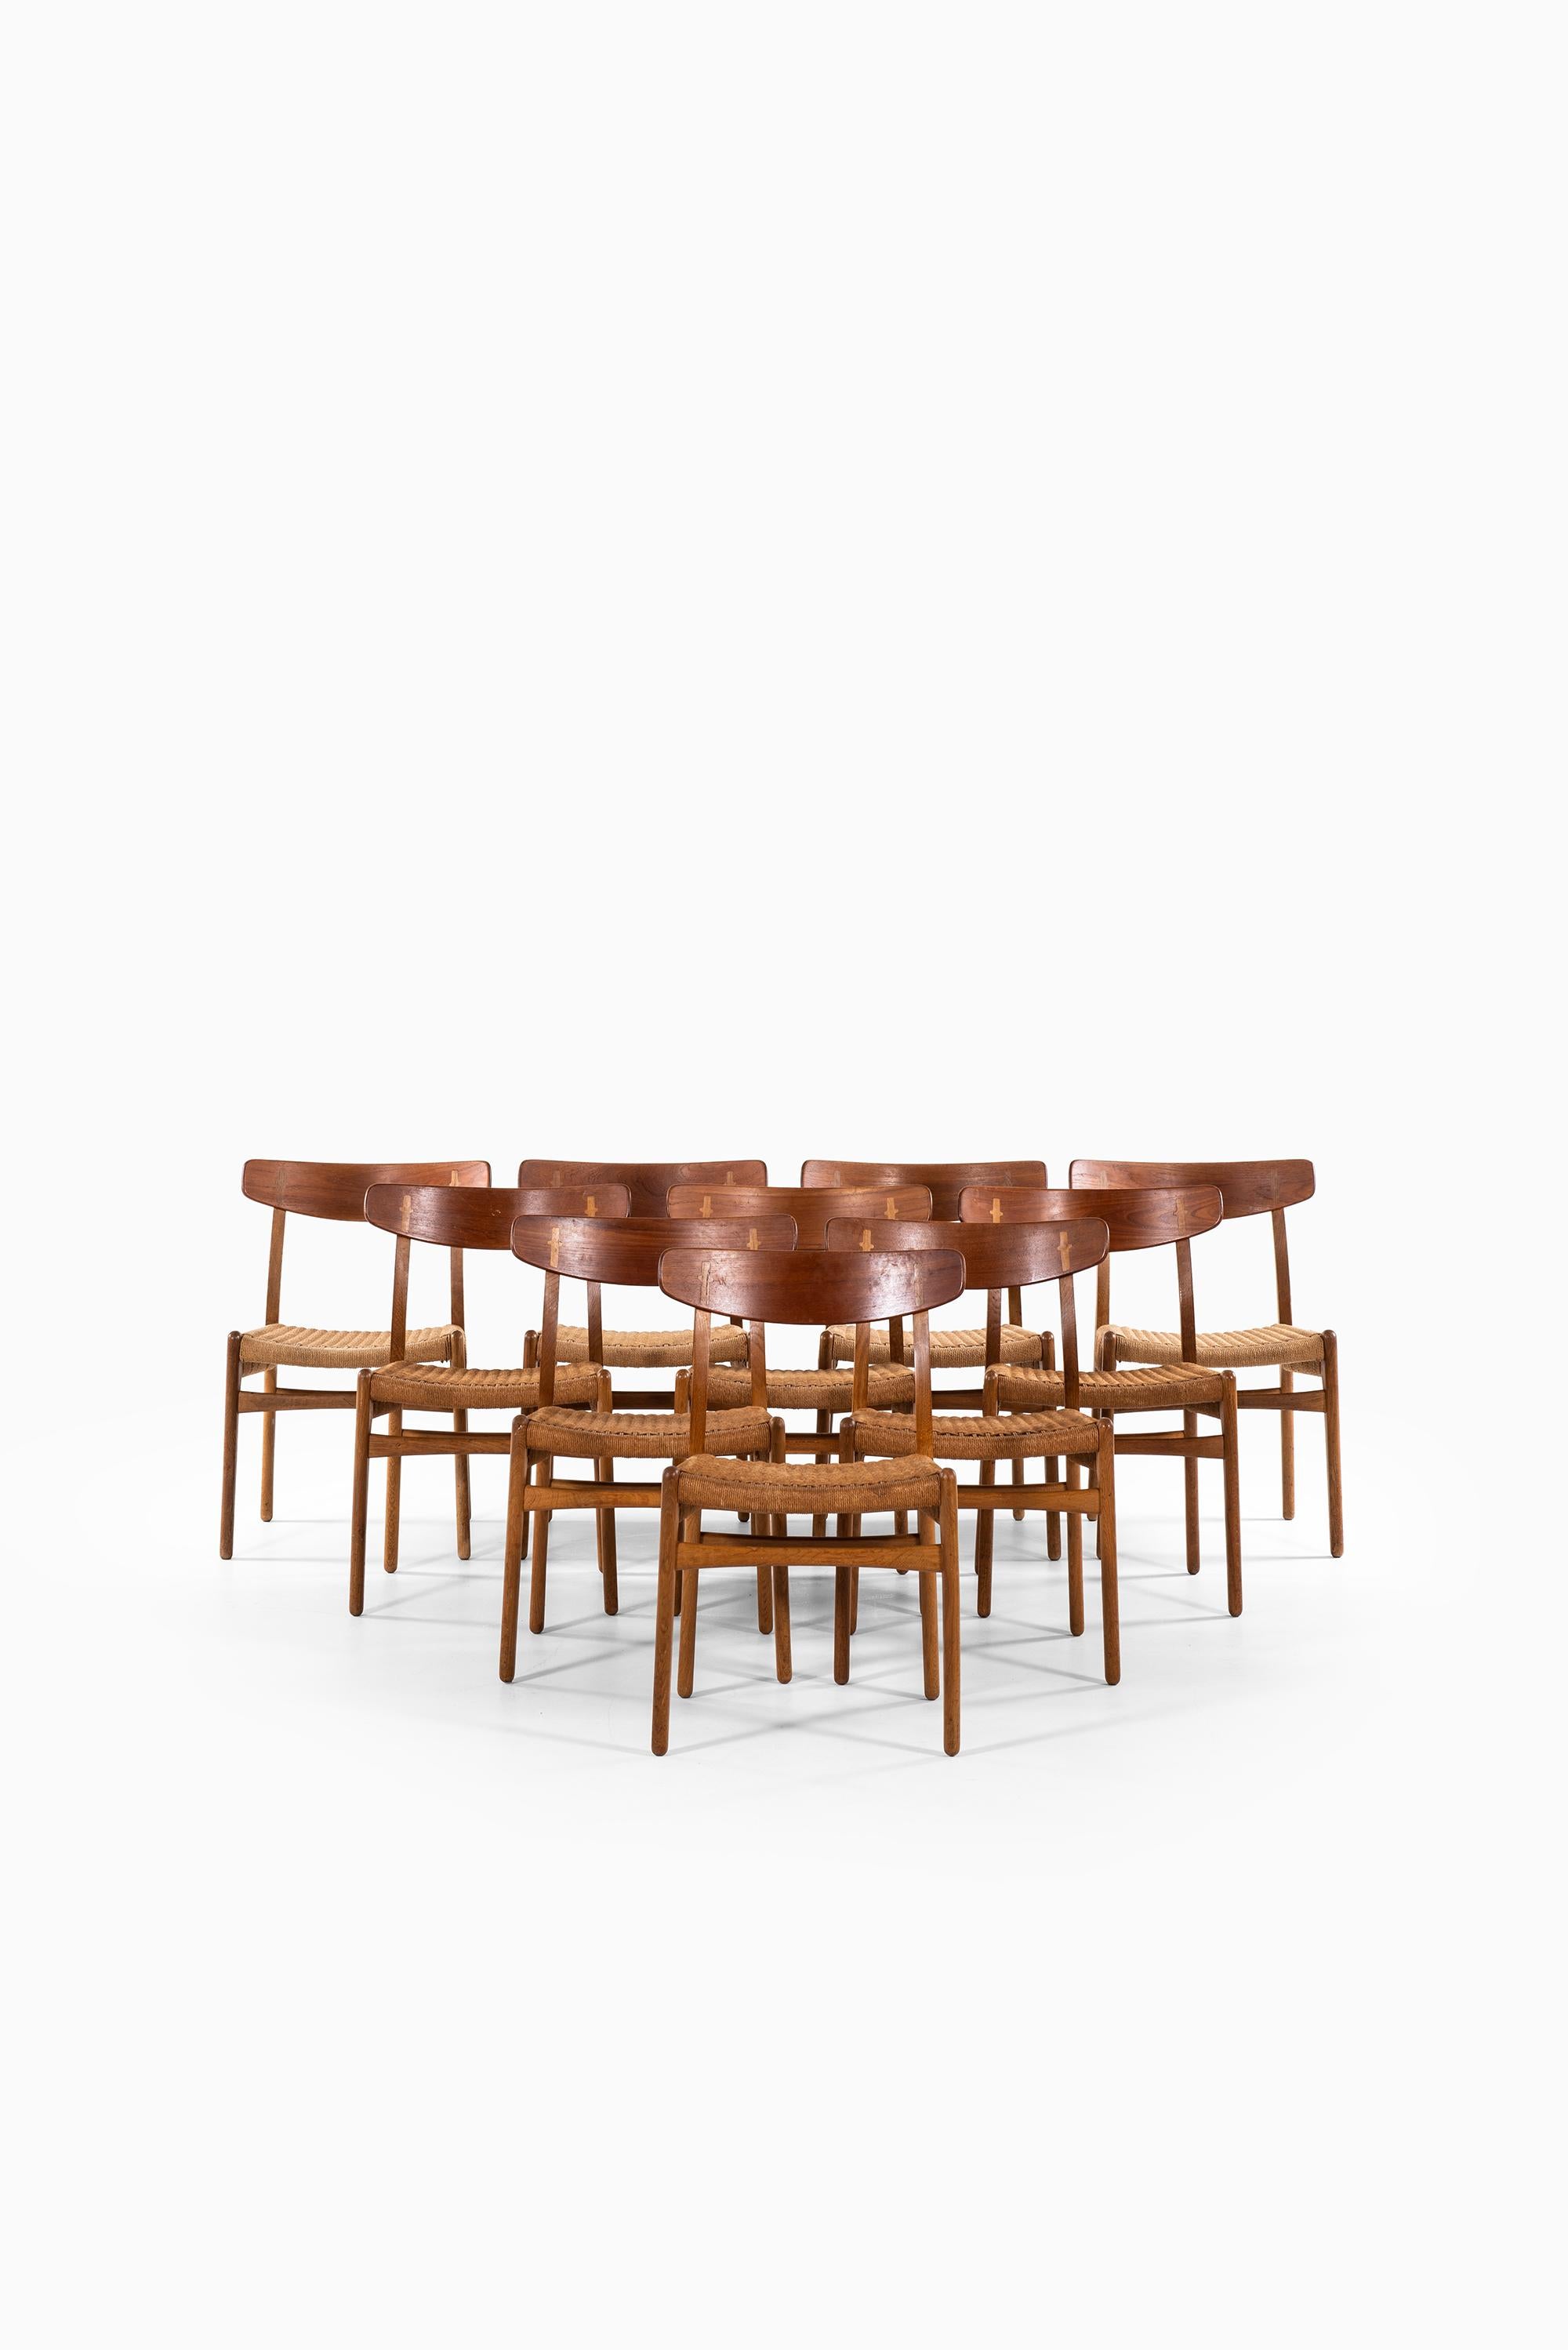 Set of 10 dining chairs model CH-23 designed by Hans Wegner. Produced by Carl Hansen & Son in Denmark.